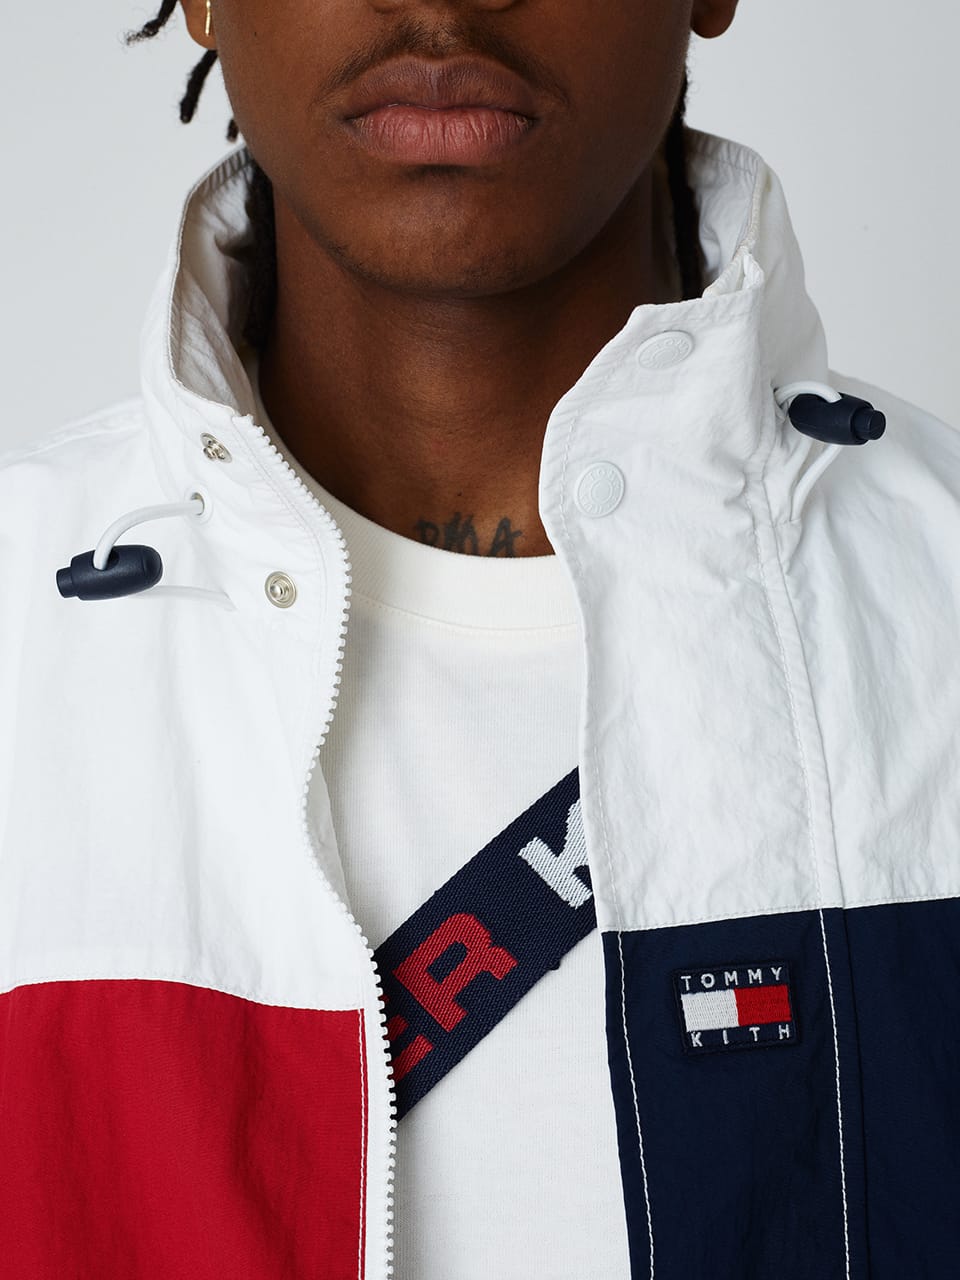 Kith X Tommy Hilfiger Top Sellers, 54% OFF | www.emanagreen.com